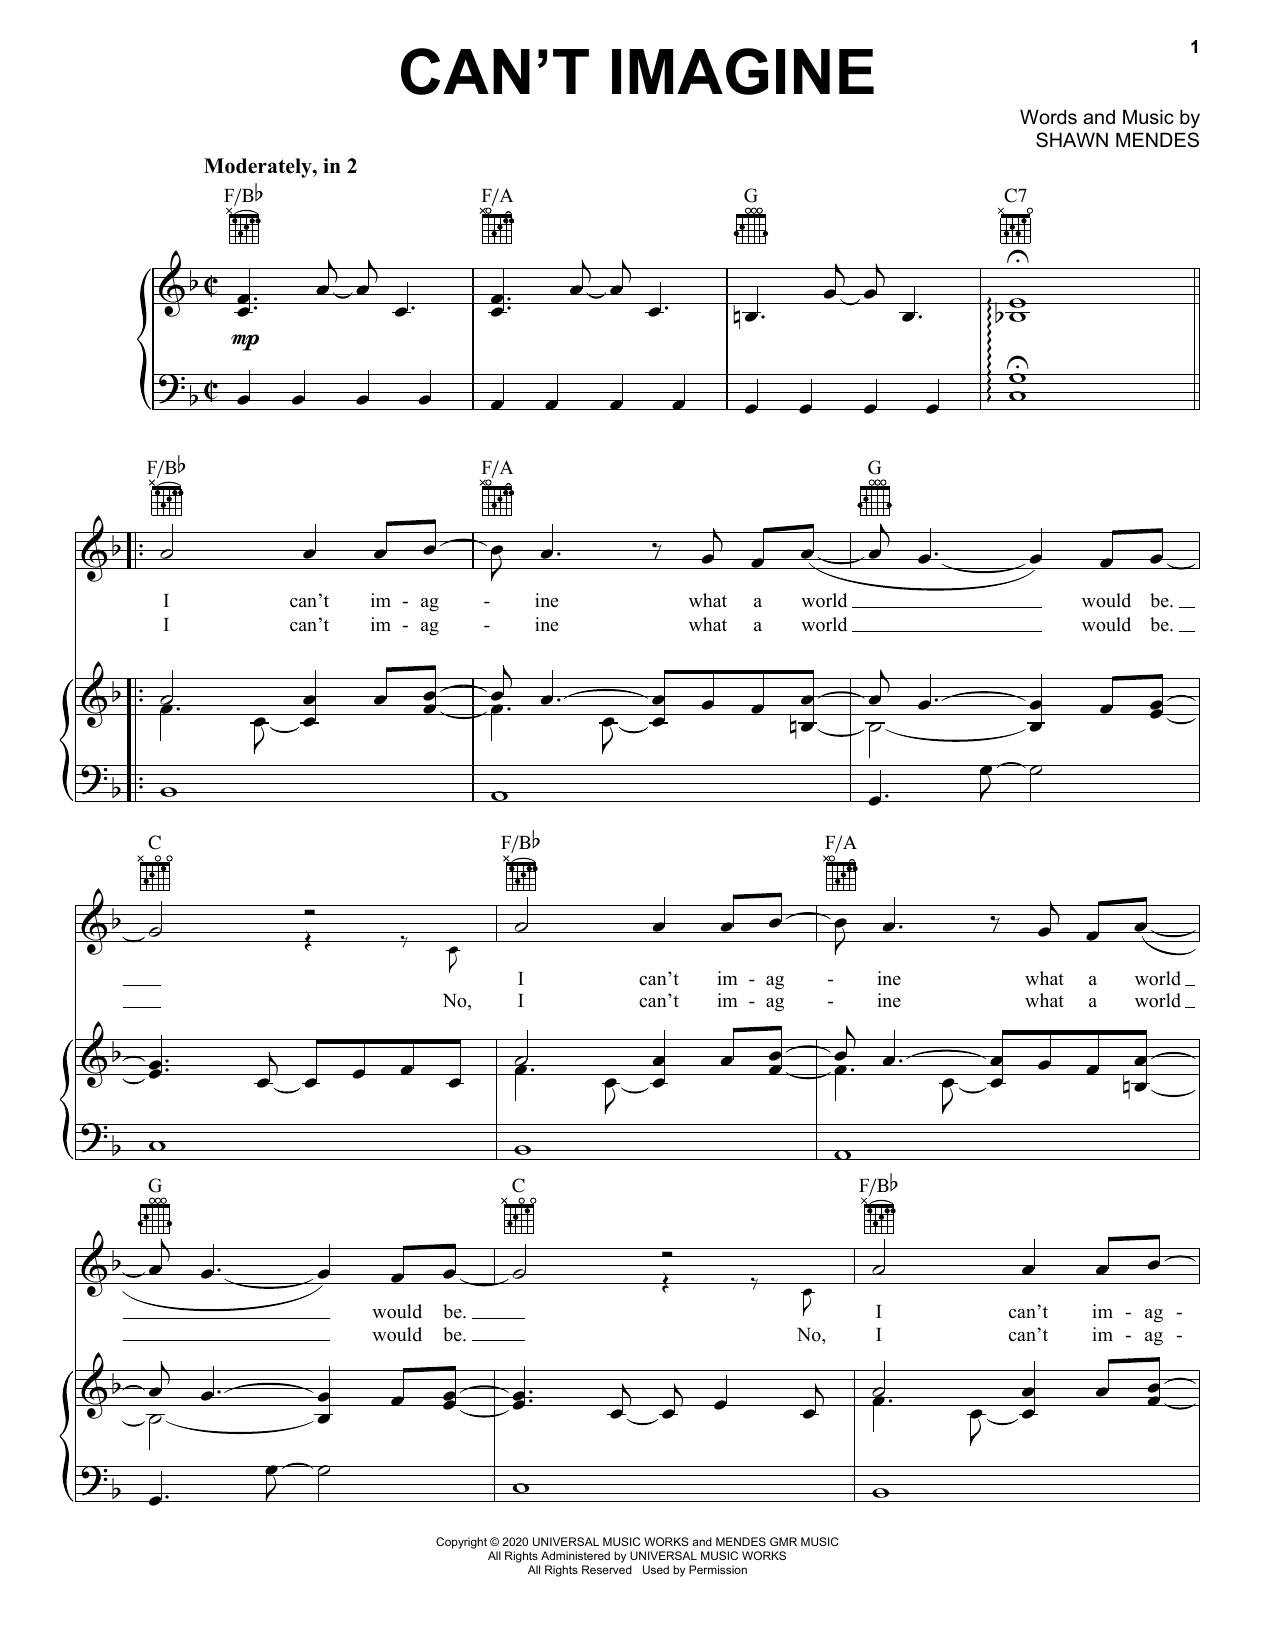 Download Shawn Mendes Can't Imagine Sheet Music